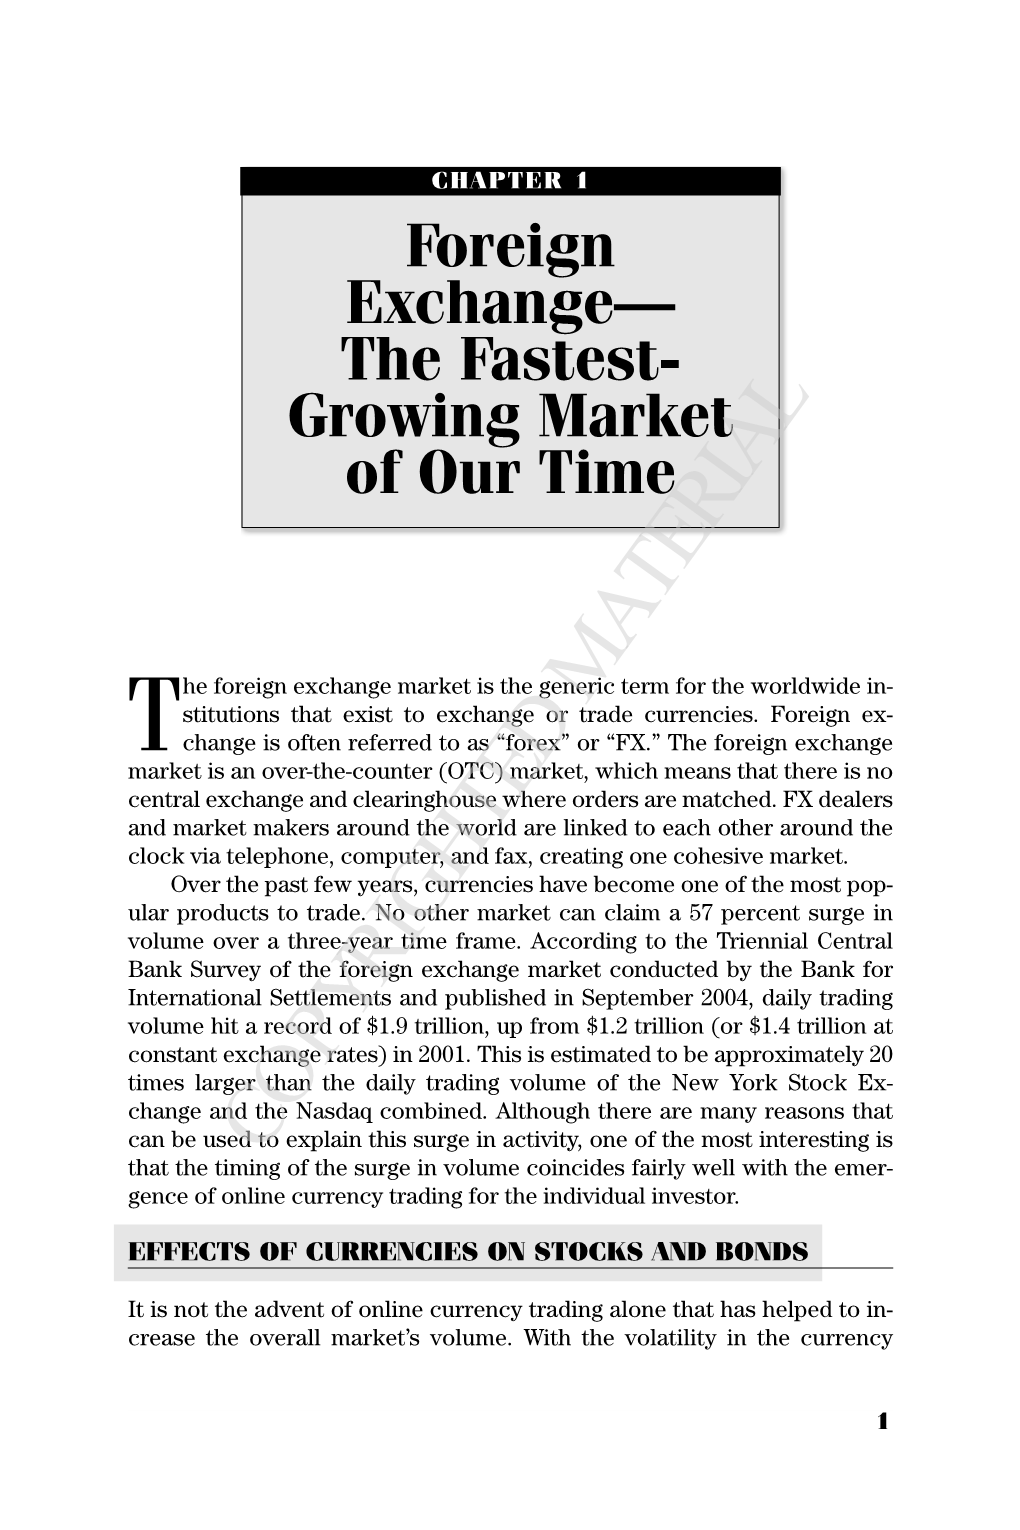 Foreign Exchange— the Fastest- Growing Market of Our Time